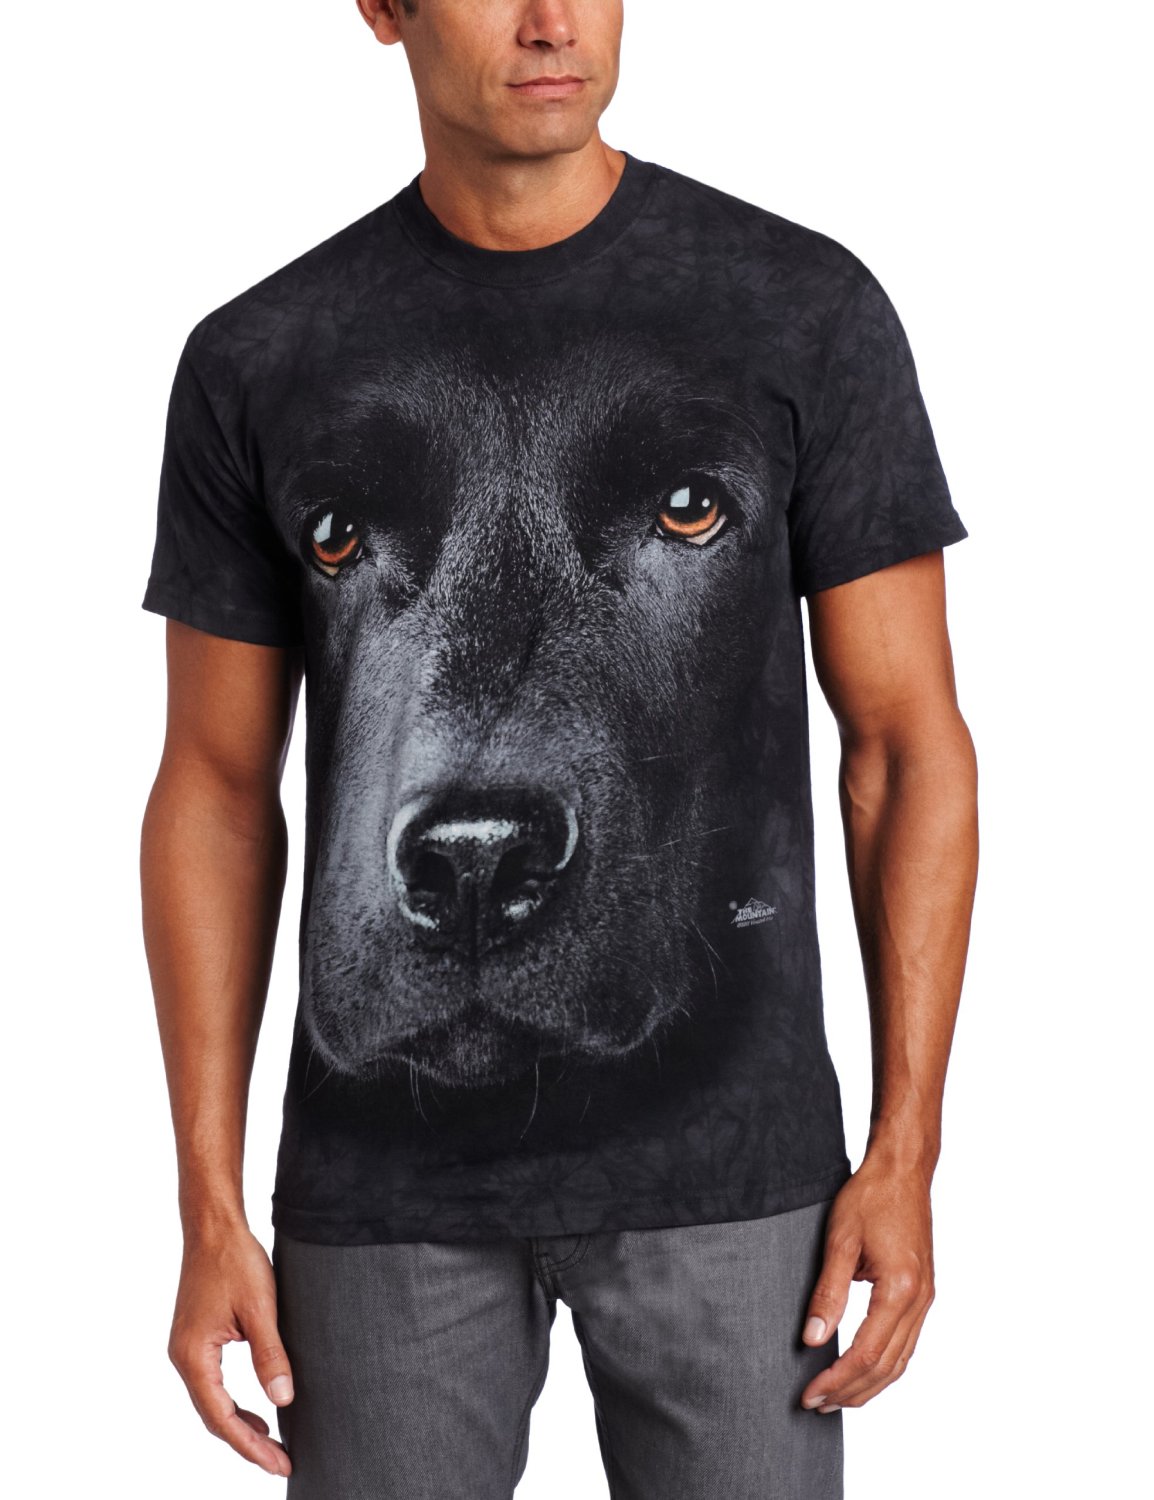 dogsforlife: Wicked and Realistic Dog Face T-Shirts, 'A Must Have for ...